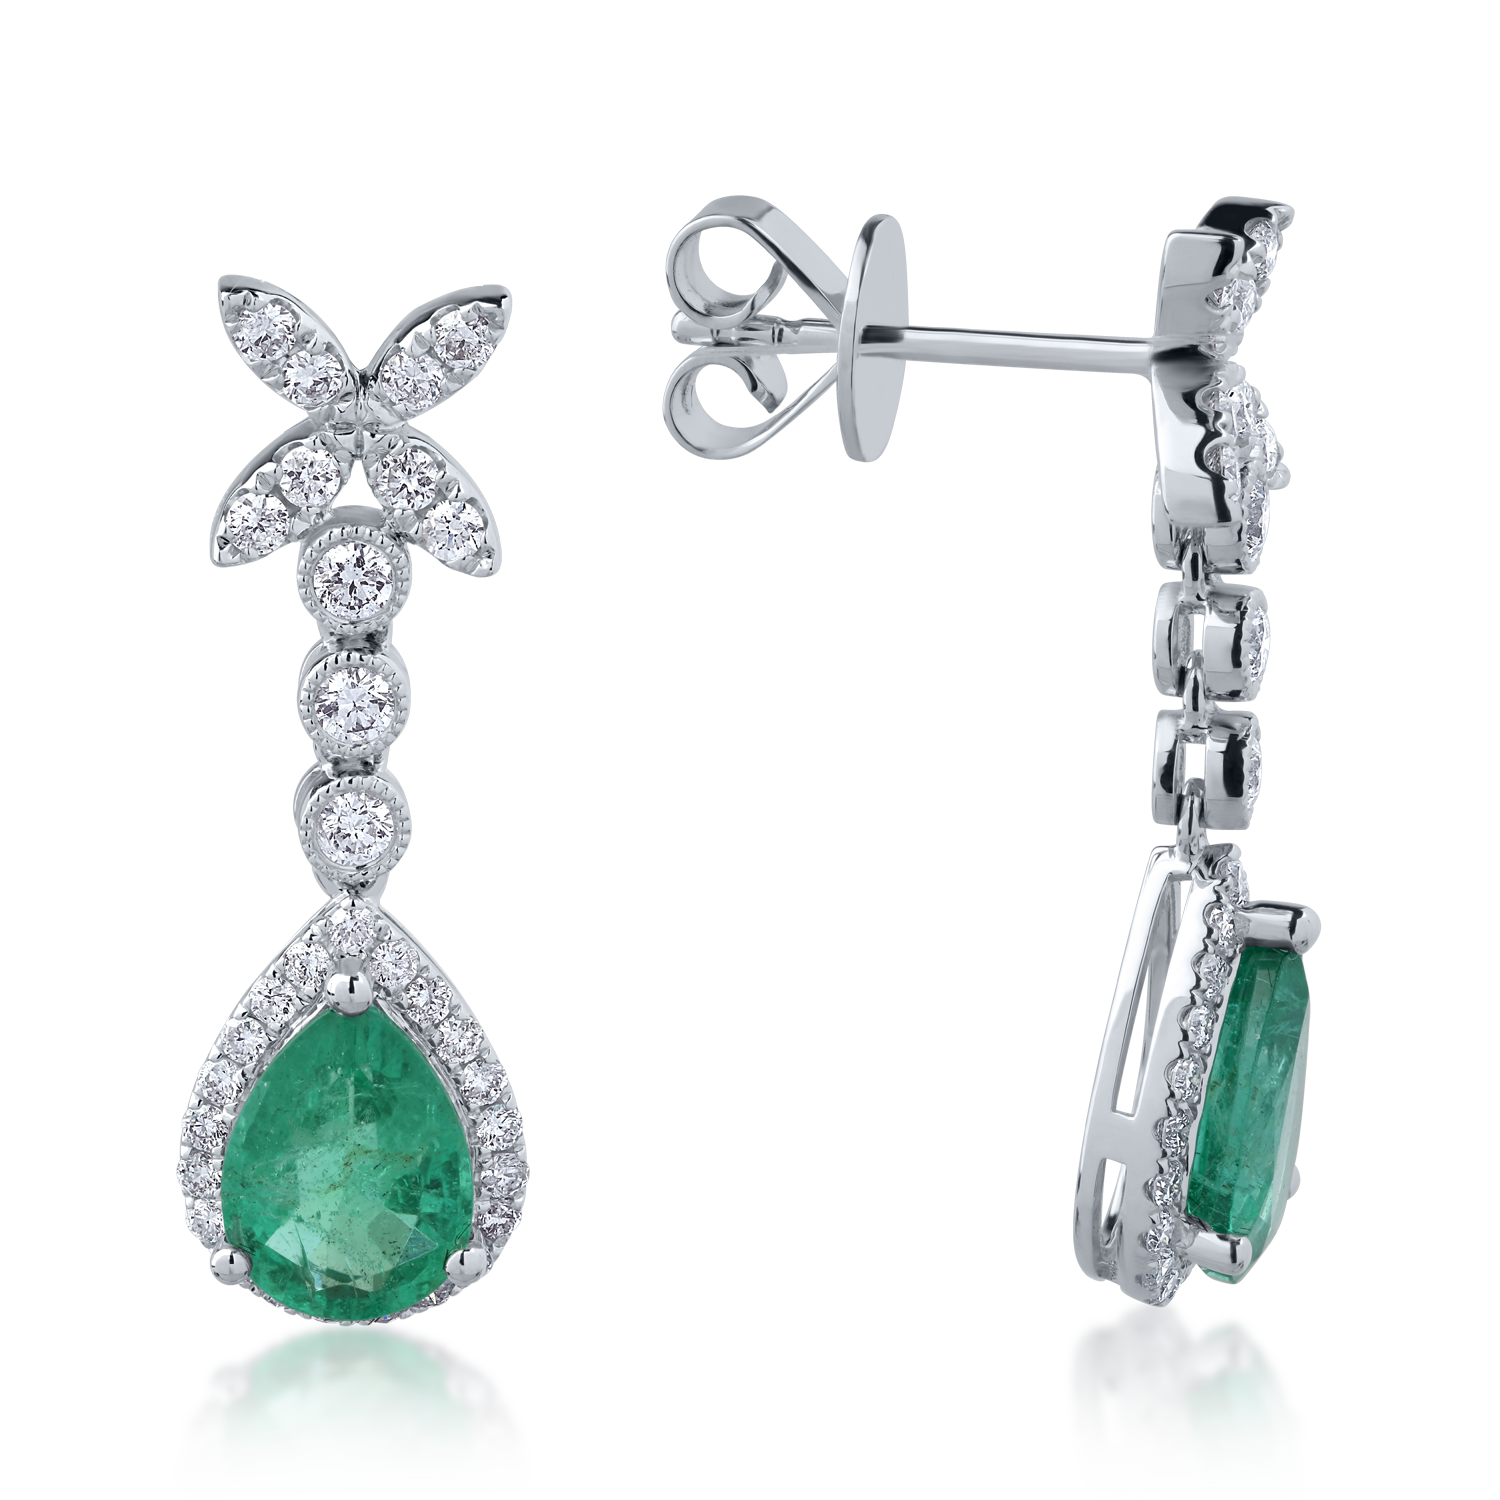 18K white gold earrings with 2ct emeralds and 0.6ct diamonds